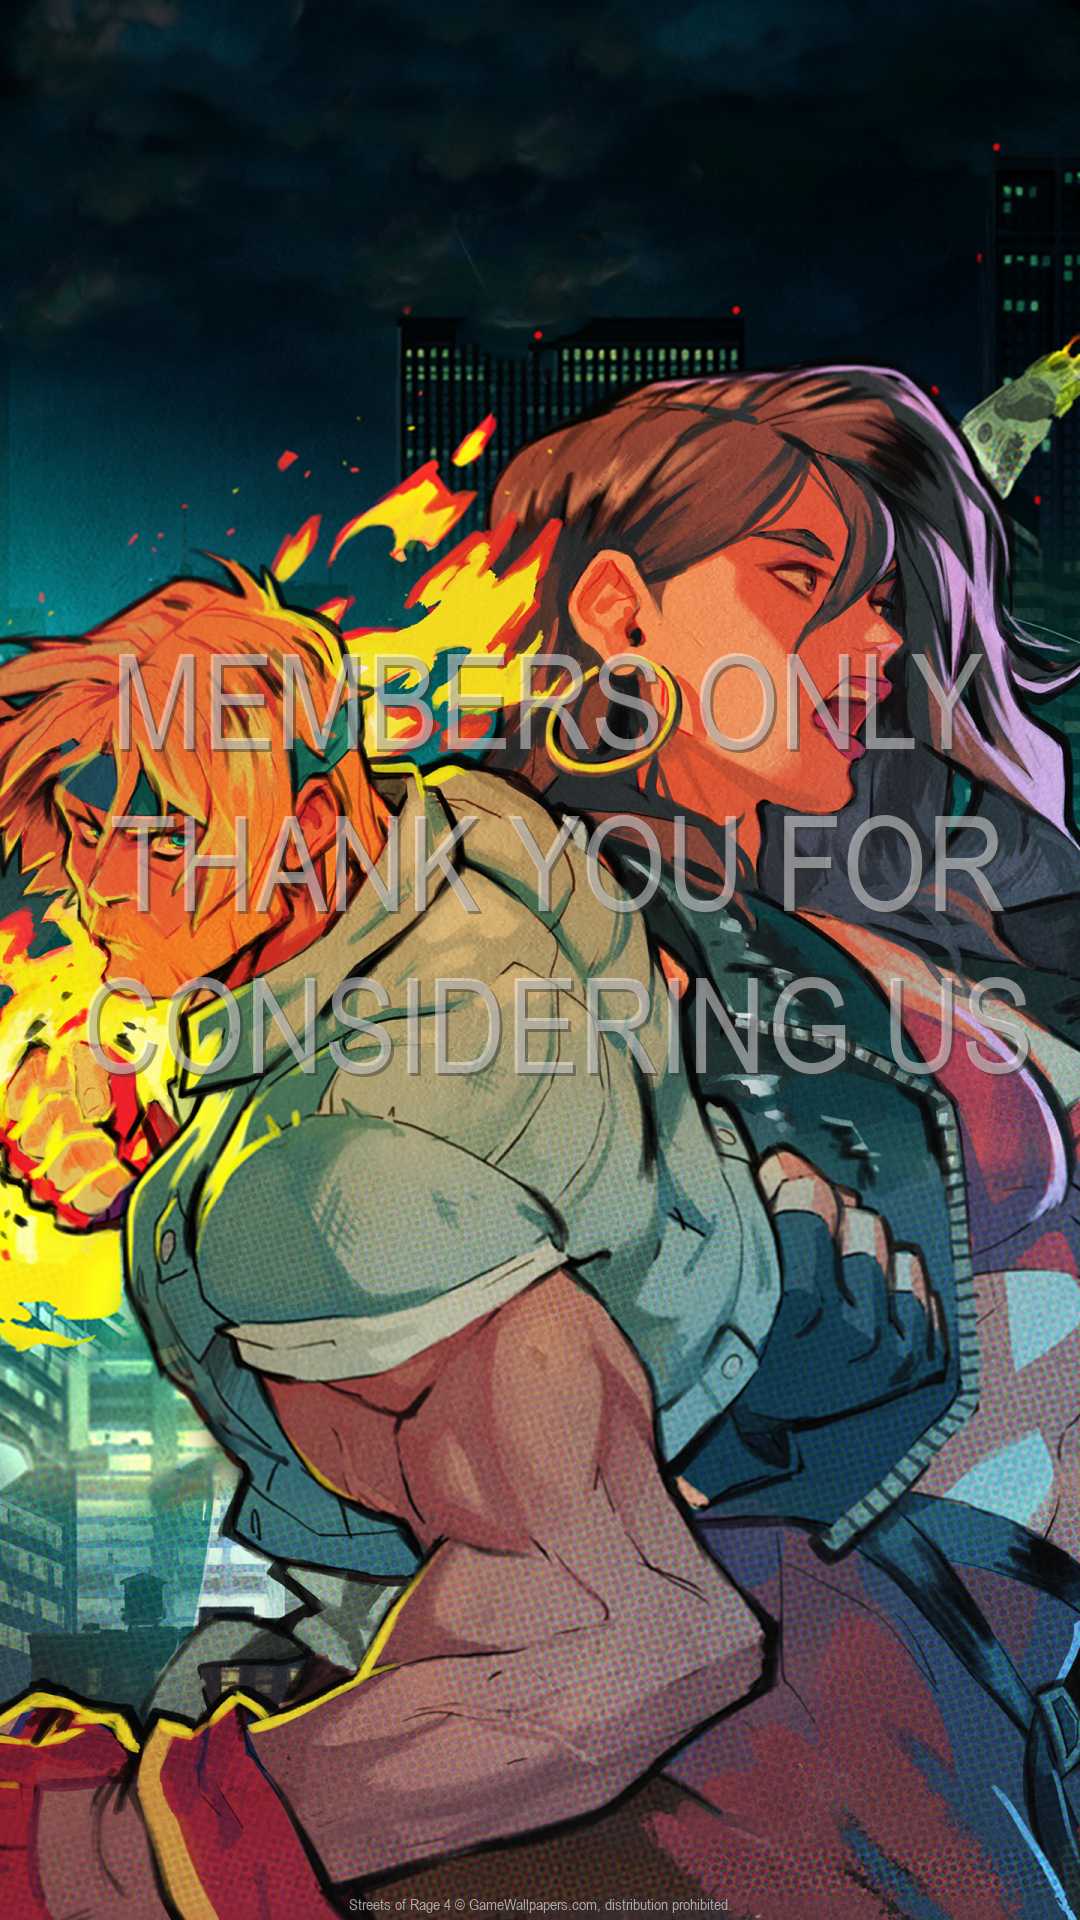 Streets of Rage 4 1080p%20Vertical Mobile wallpaper or background 01